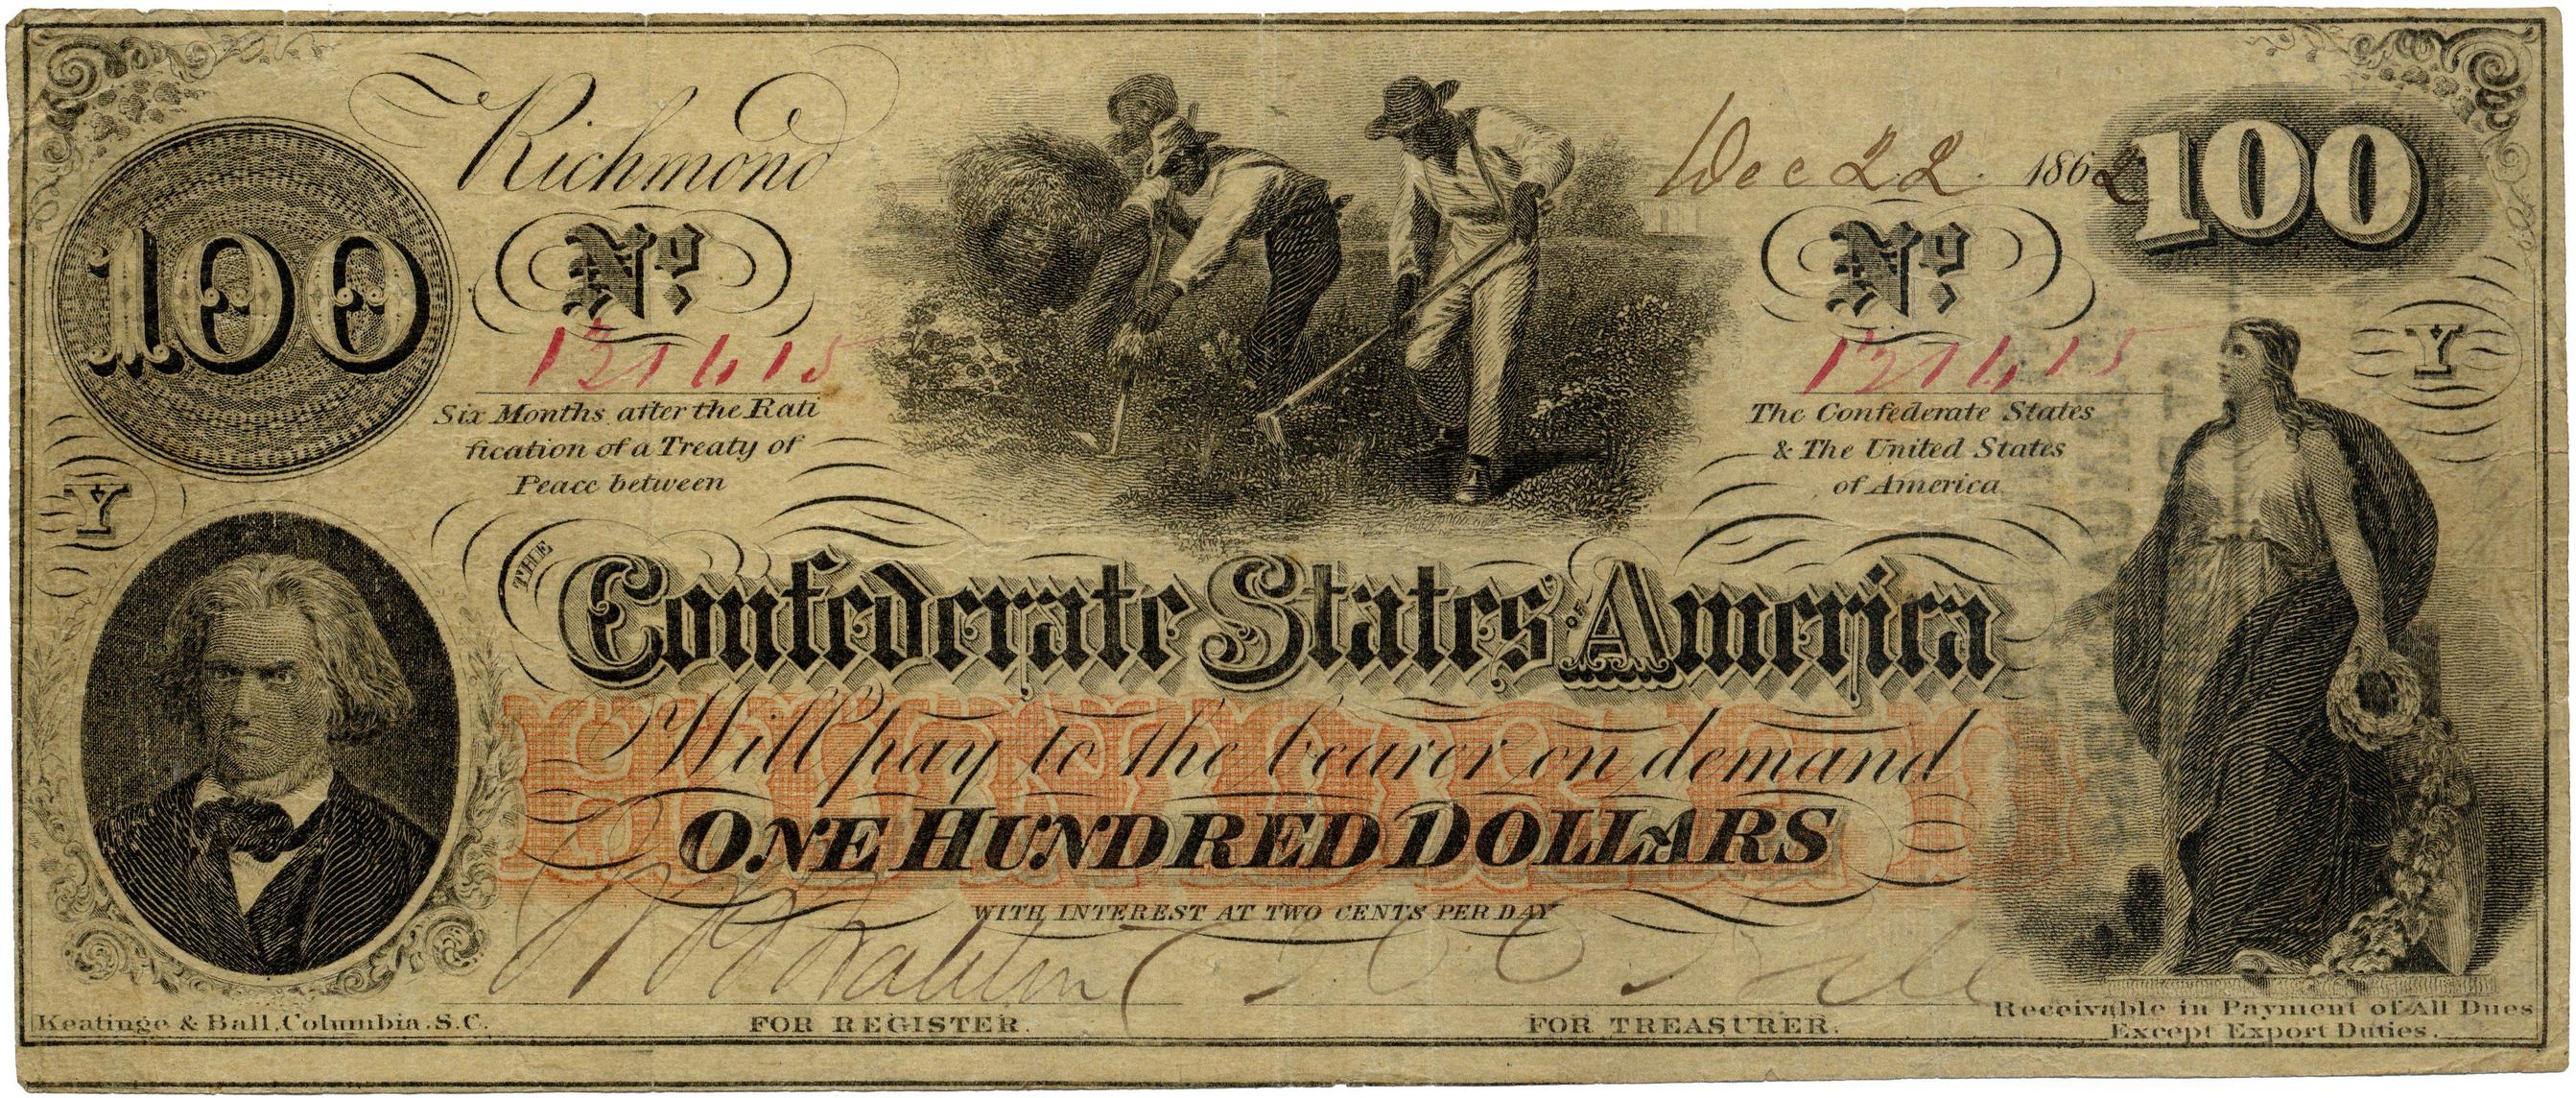 A One Hundred Dollar Confederate States of America banknote, Issued during the American Civil War, December 22, 1862